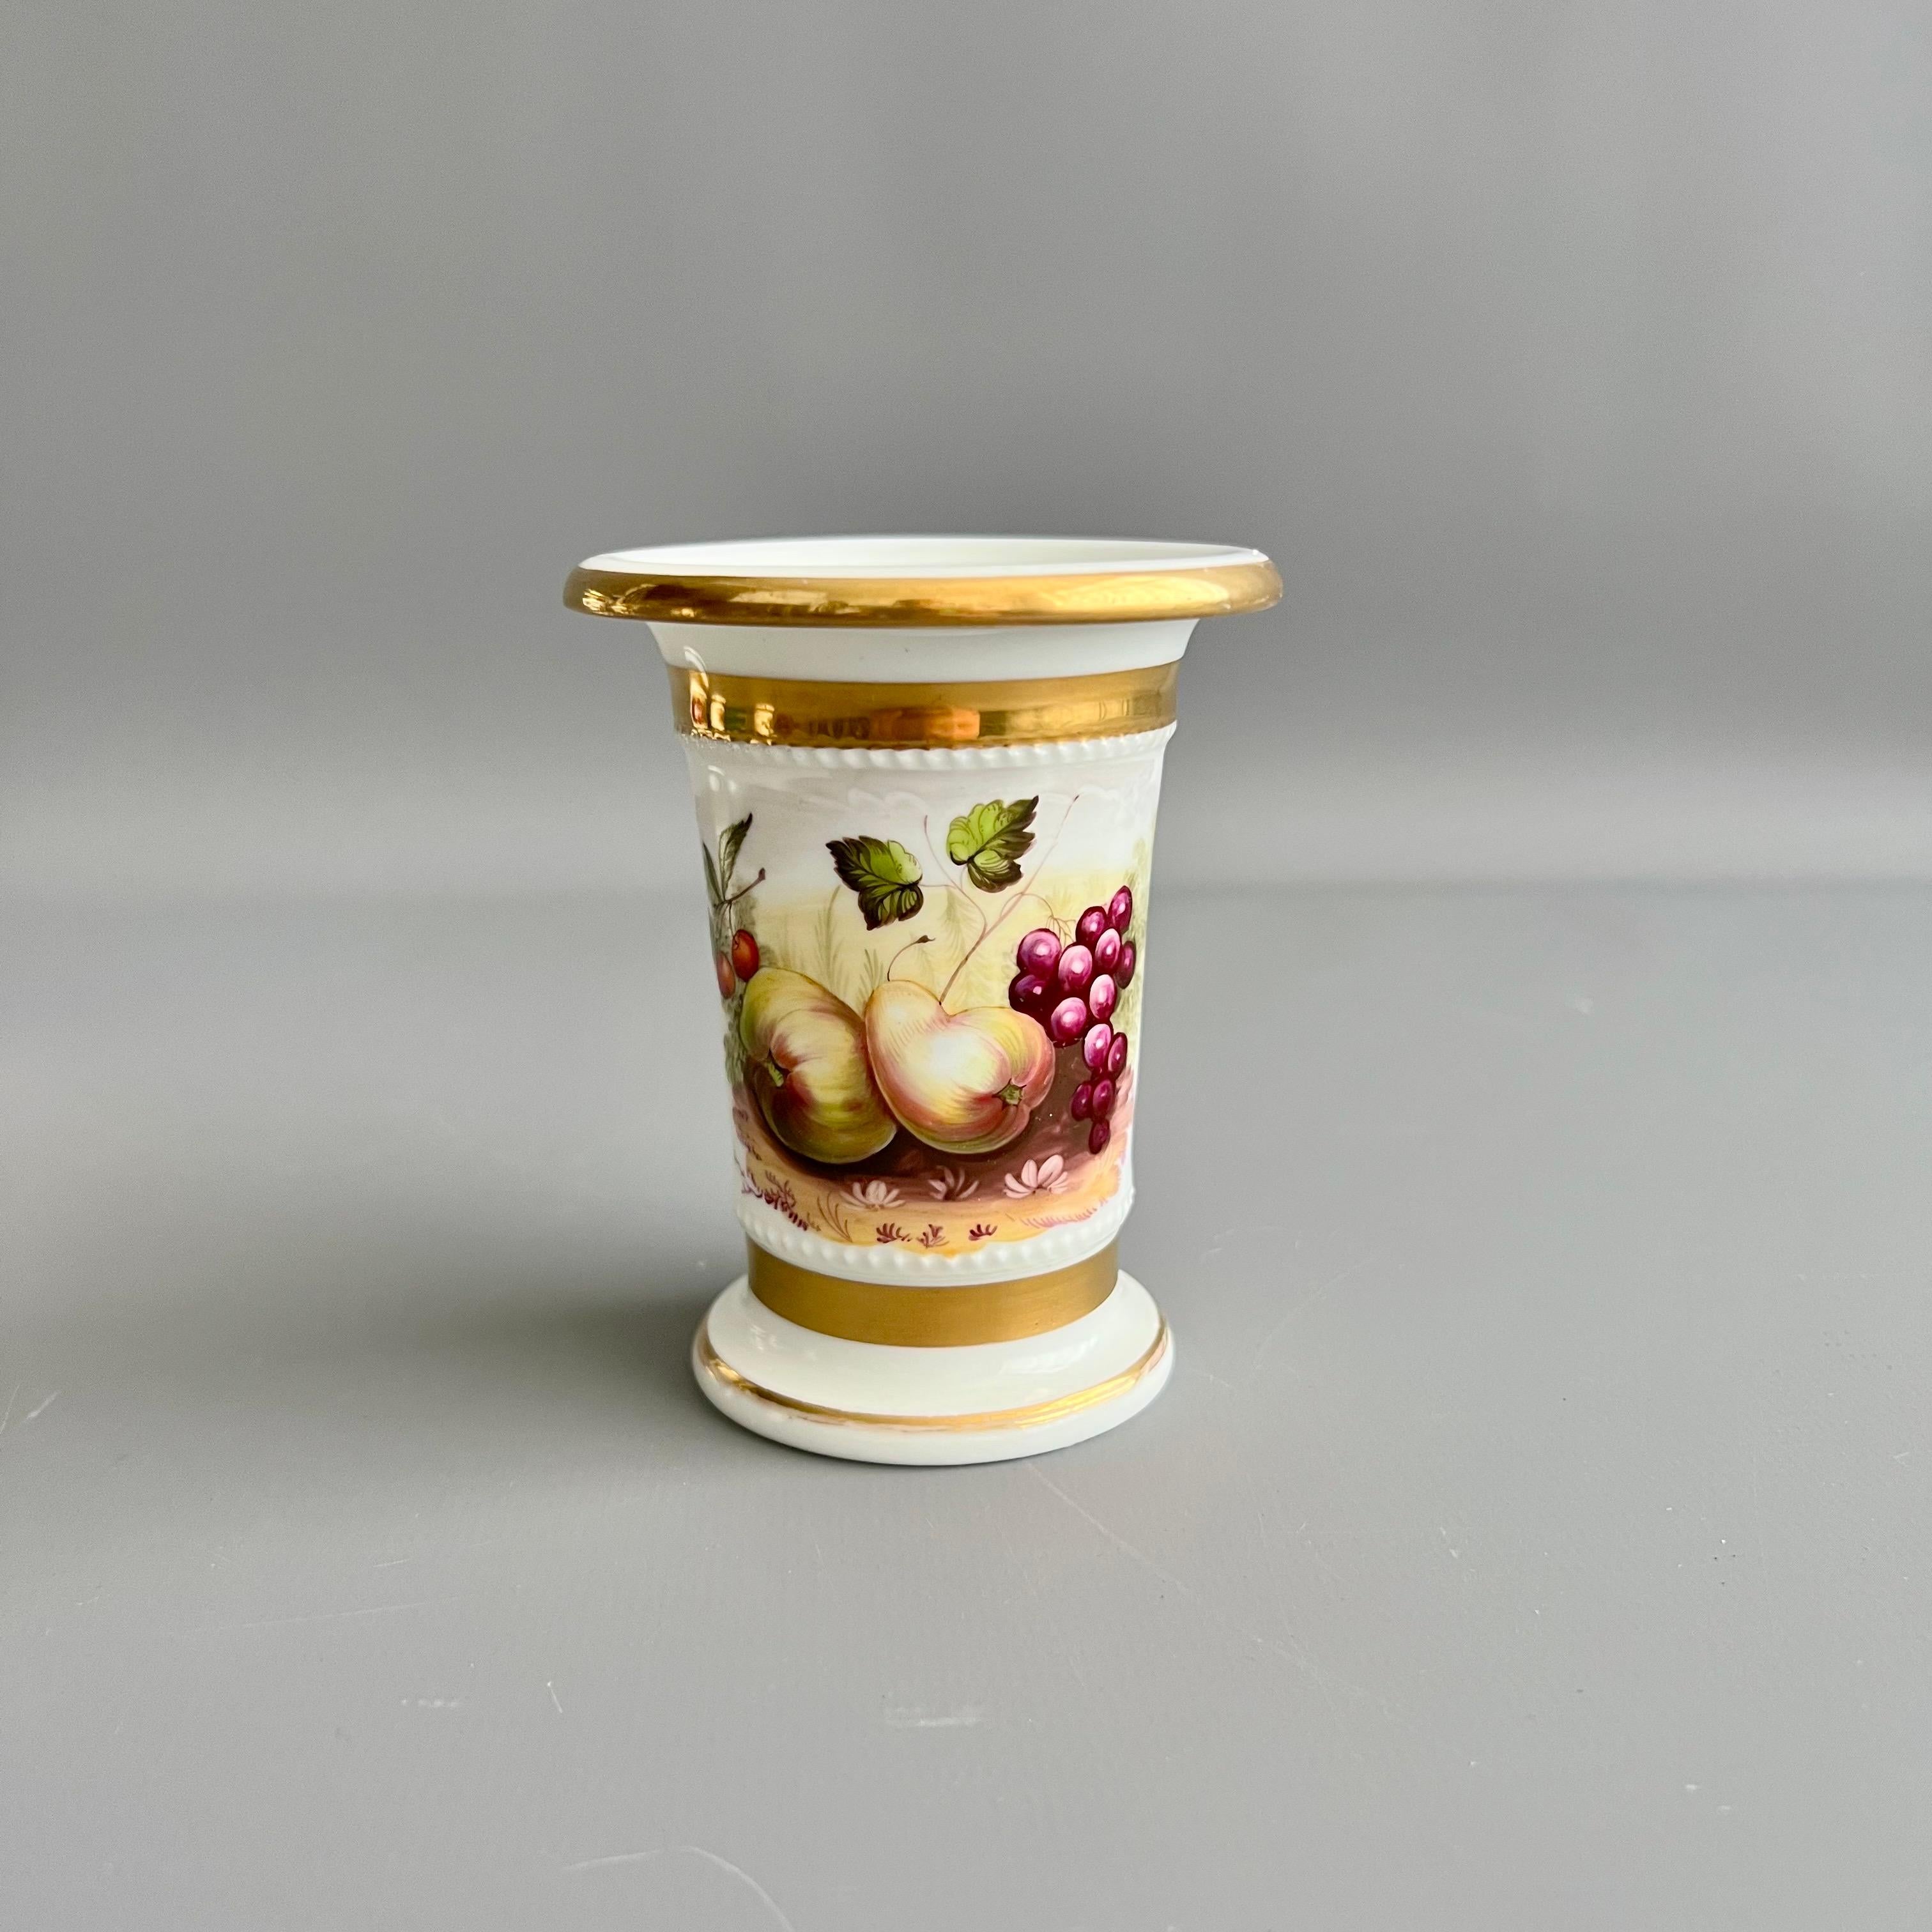 English Garniture of 5 Porcelain Vases, White, Hand Painted Fruits, 1820-1825 For Sale 5